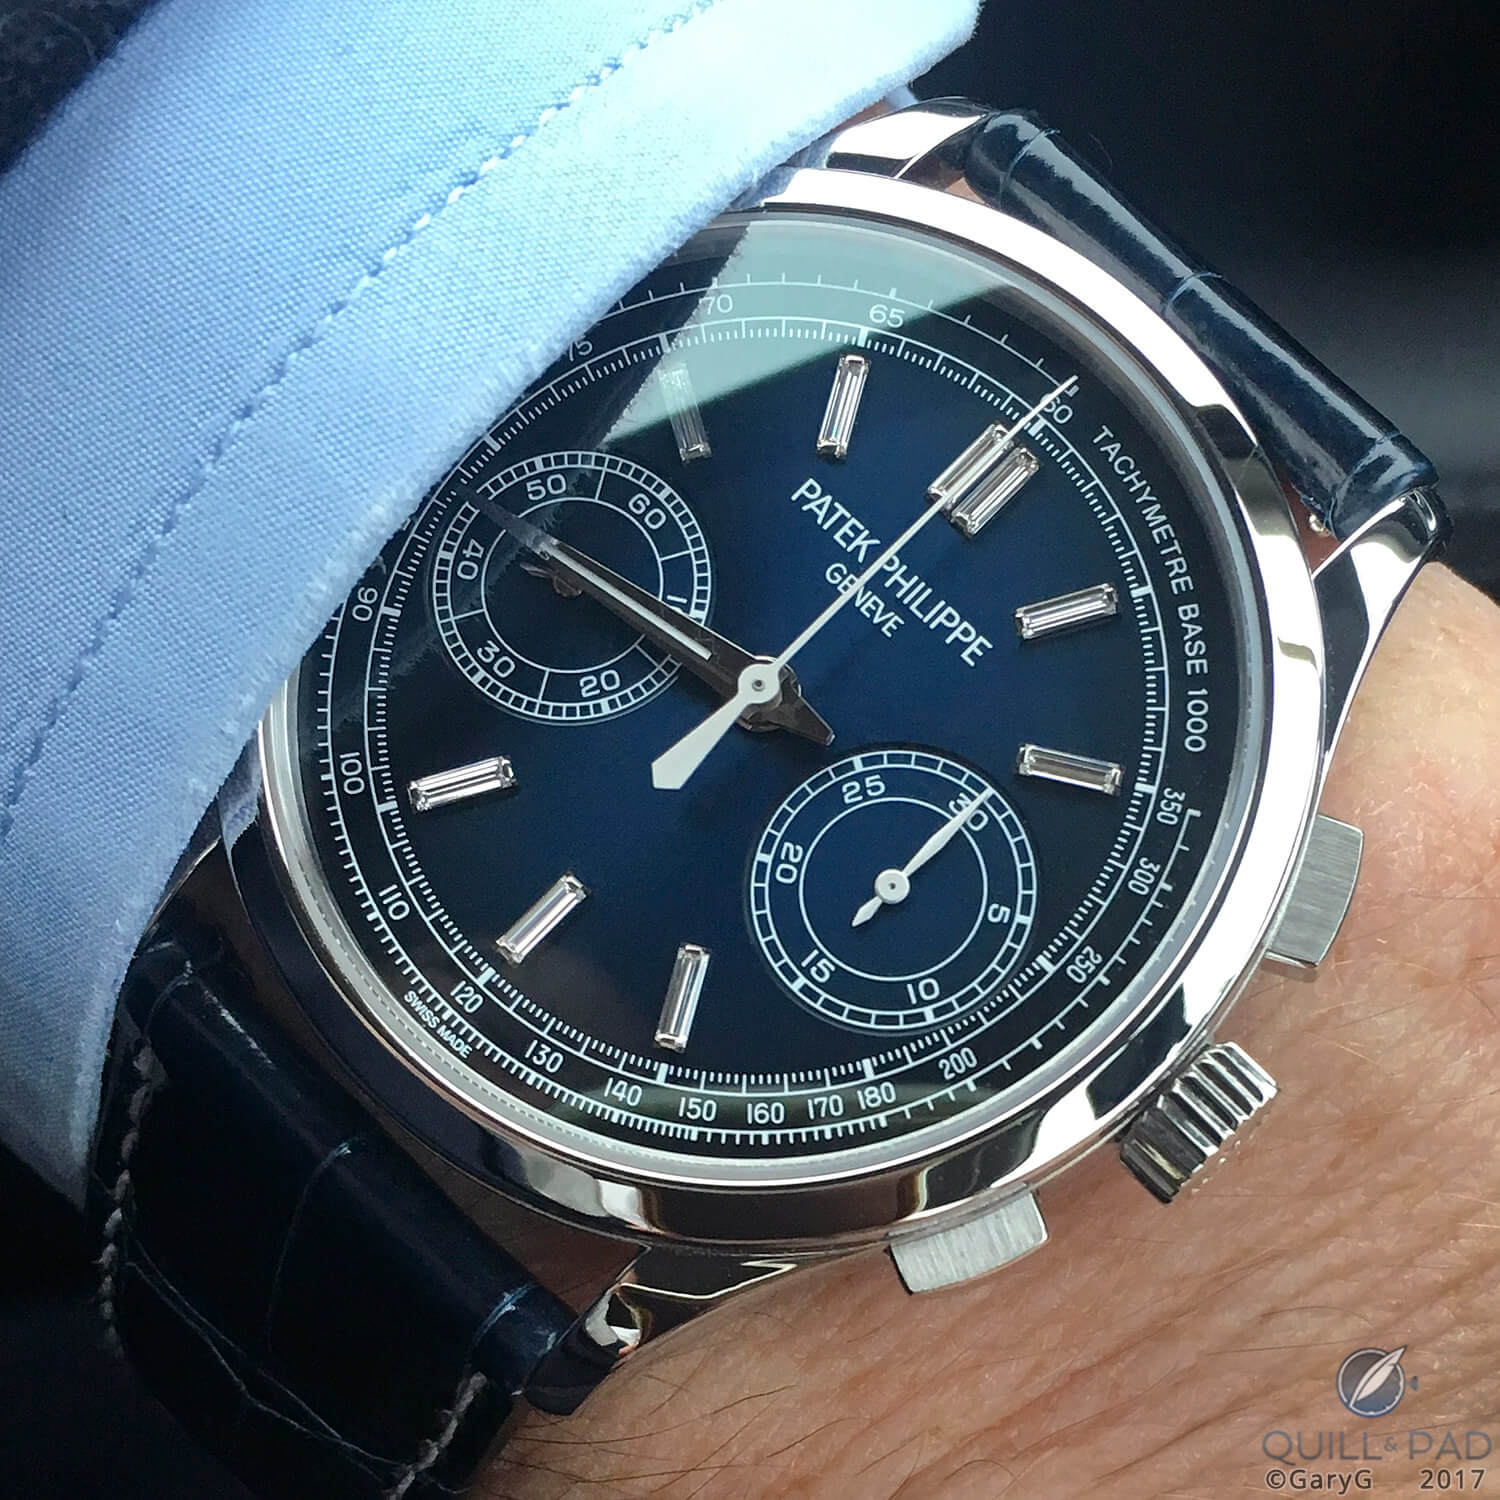 On the wrist: the author’s Patek Philippe Reference 5170P